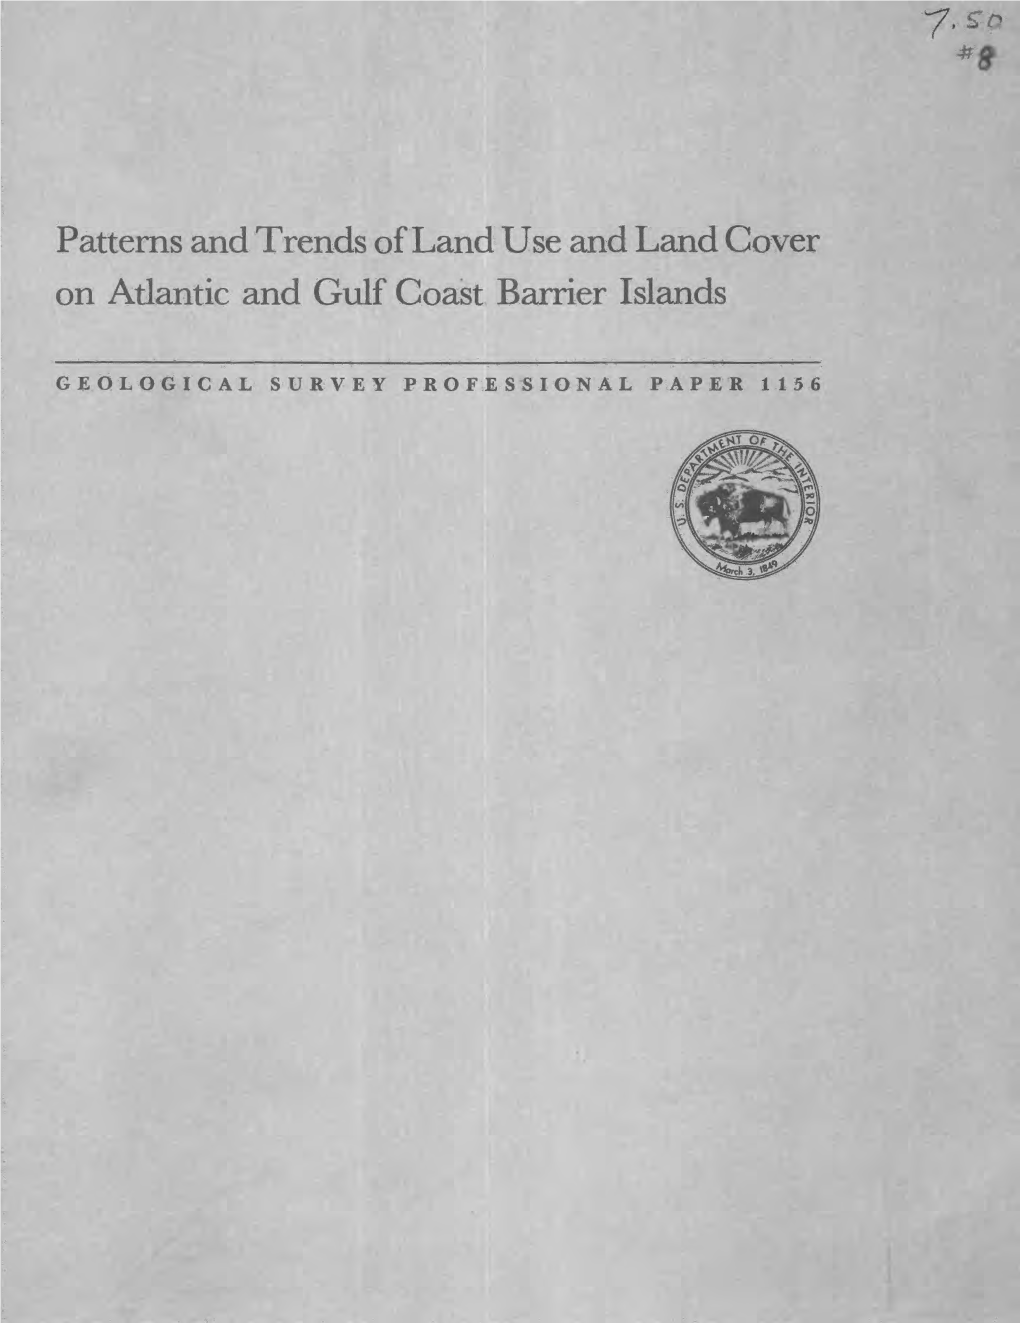 Patterns and Trends of Land Use and Land Cover on Atlantic and Gulf Coast Barrier Islands